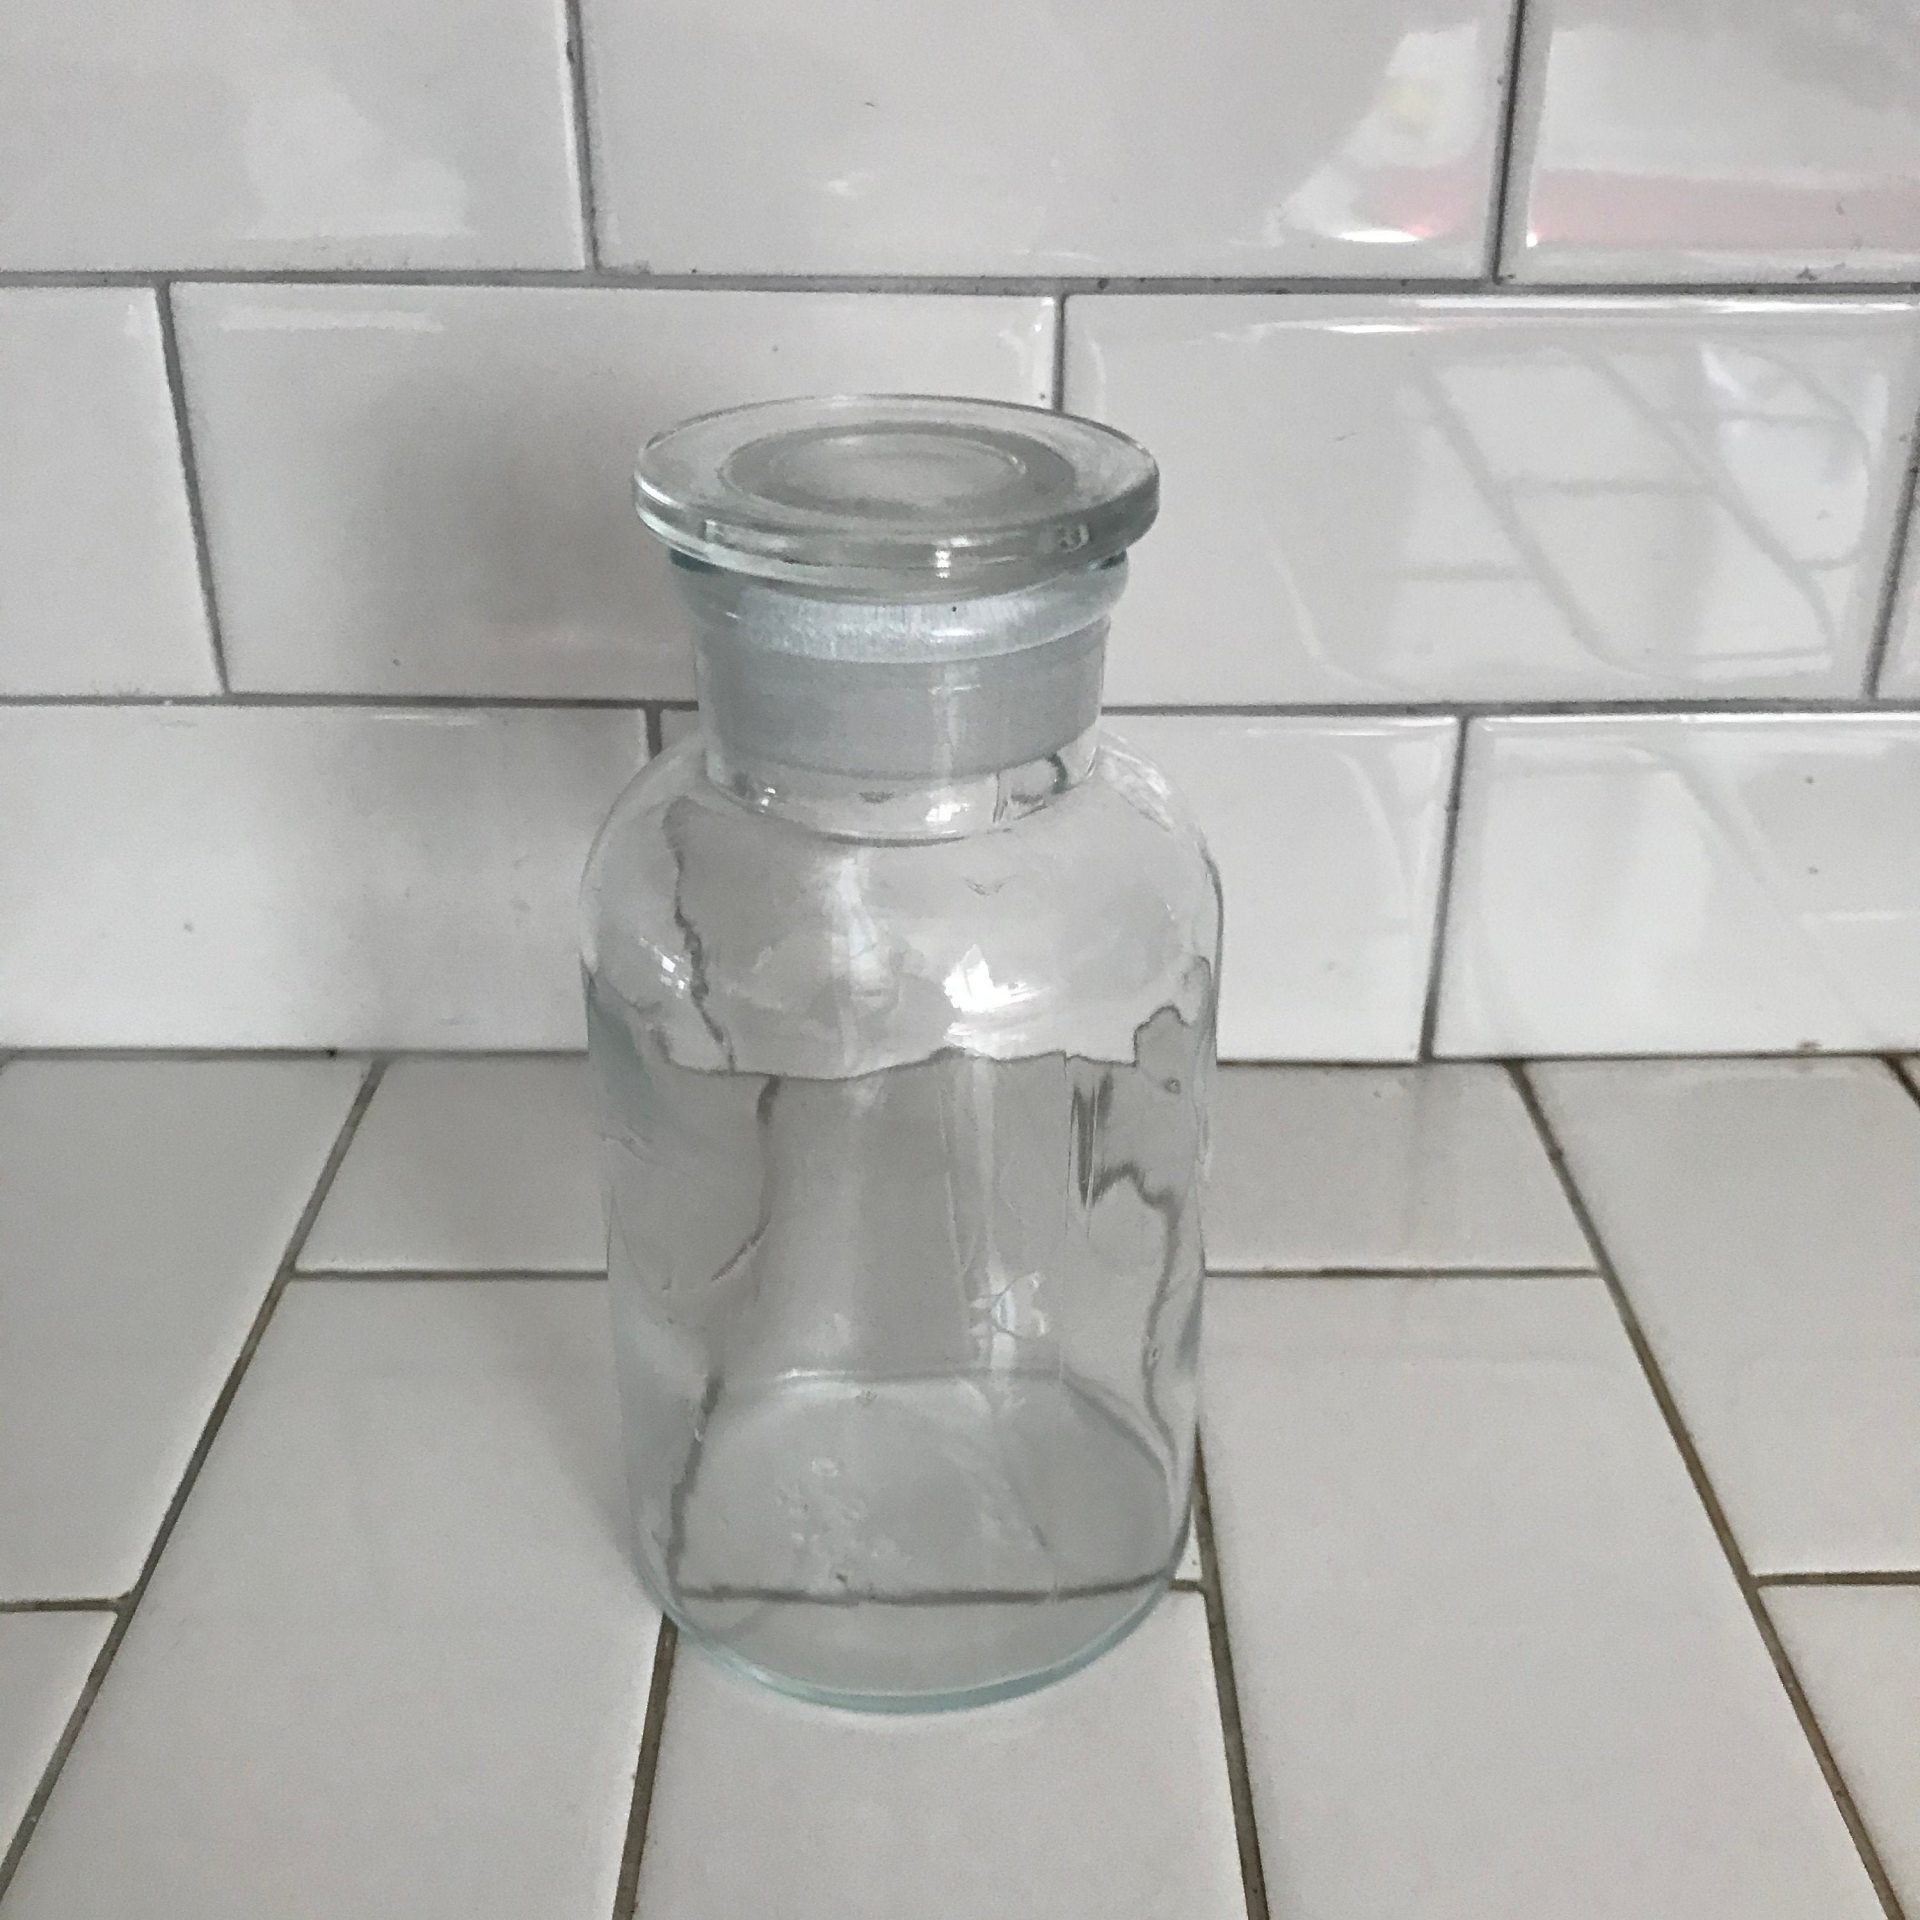 https://www.truevintageantiques.com/wp-content/uploads/2021/05/vintage-apothecary-jar-medical-collectible-ground-glass-stopper-tcw-co-usa-clear-farmhouse-primitive-rustic-medical-pharmiceutical-bottle-60990b091-scaled.jpg